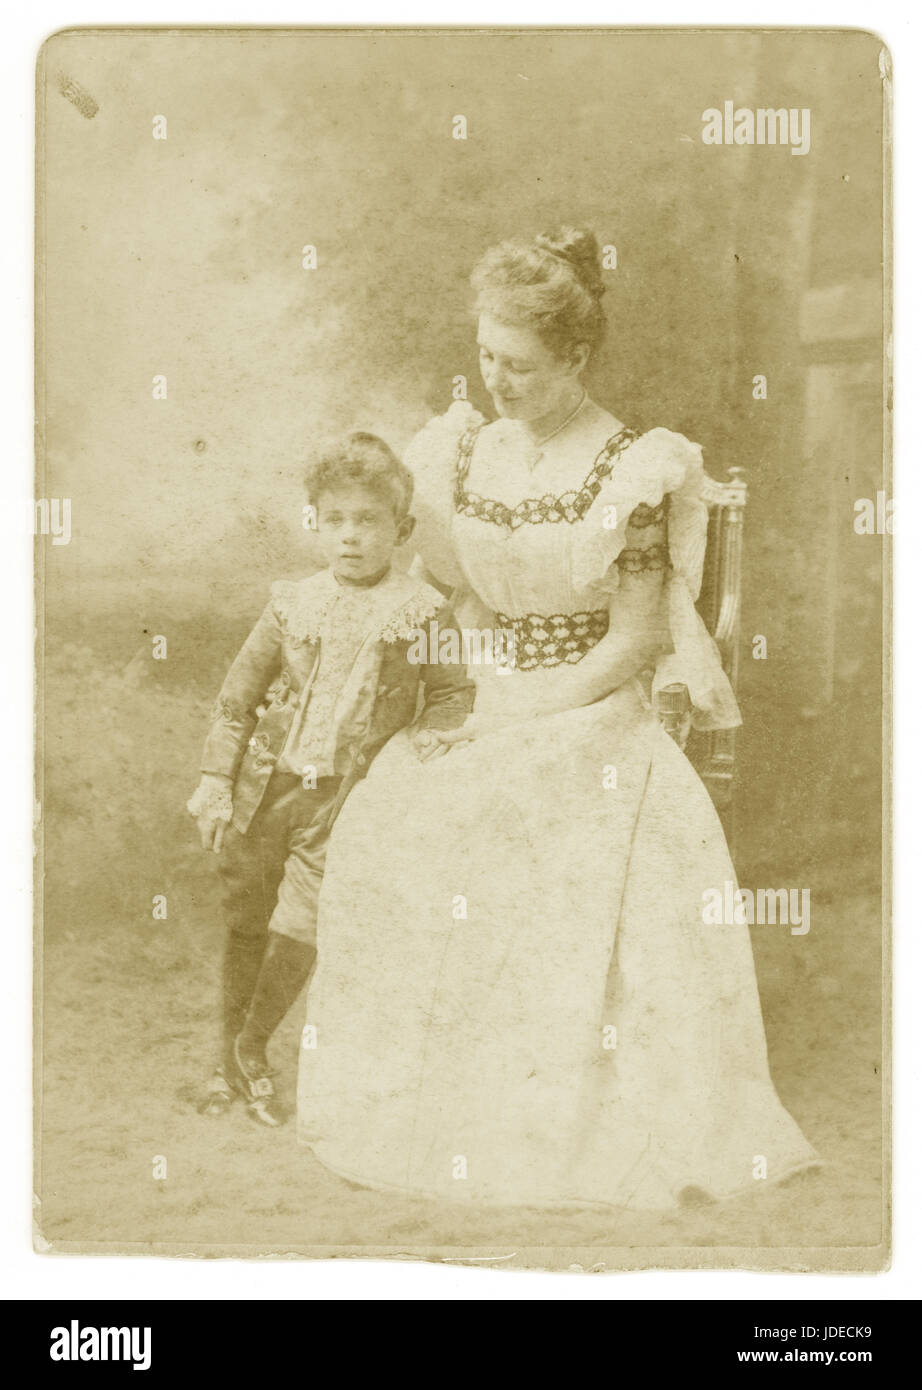 Victorian Cabinet card photograph (cropping at base) of an attractive  lady wearing a beautiful summer dress with lace sleeves, proudly holding her son who is dressed in breeches and frilly shirt collar and velvet jacket - a fashion inspired by the Little Lord Fauntleroy novel by Frances Hodgson Burnett.published in 1885–1886. Circa 1890's Stock Photo